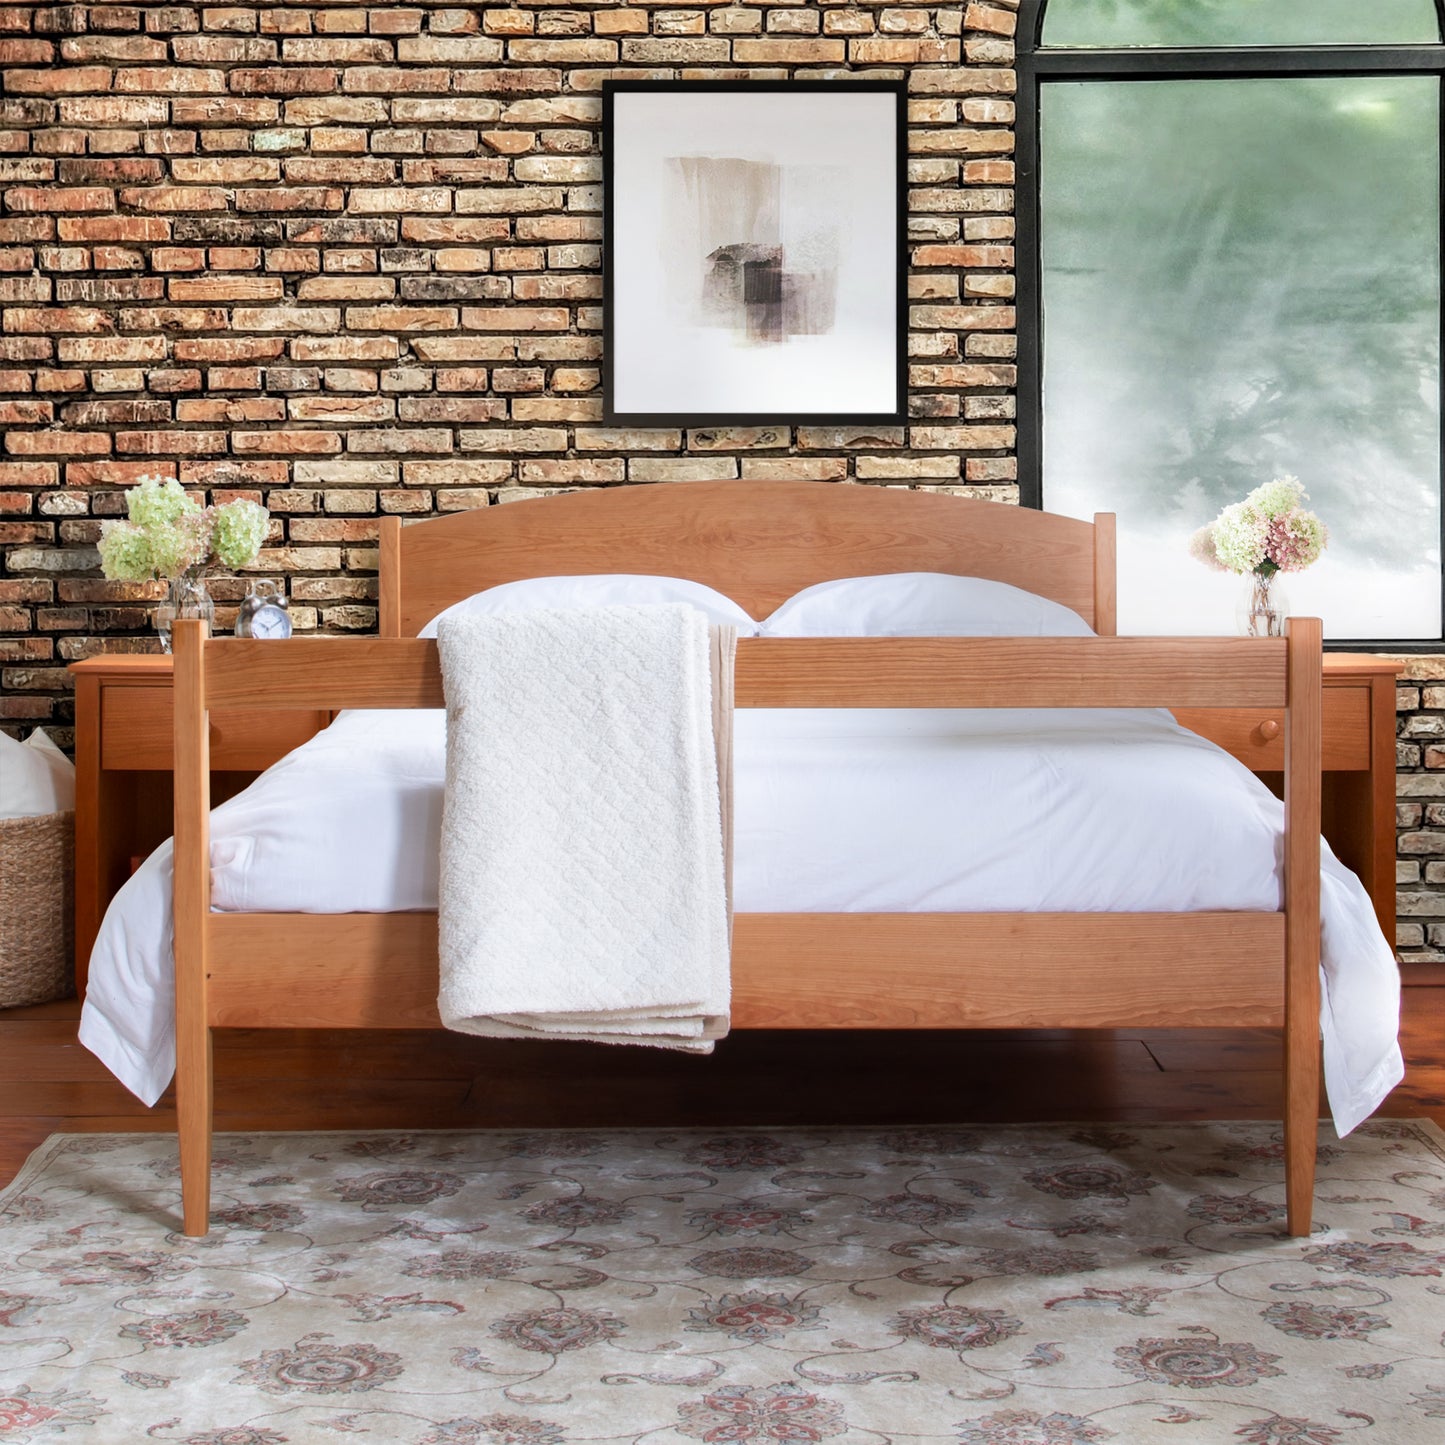 A Maple Corner Woodworks Vermont Shaker Bed made of wood, with white bedding and a white throw blanket, flanked by two small nightstands with flowers, placed in a room with a brick wall and a framed.